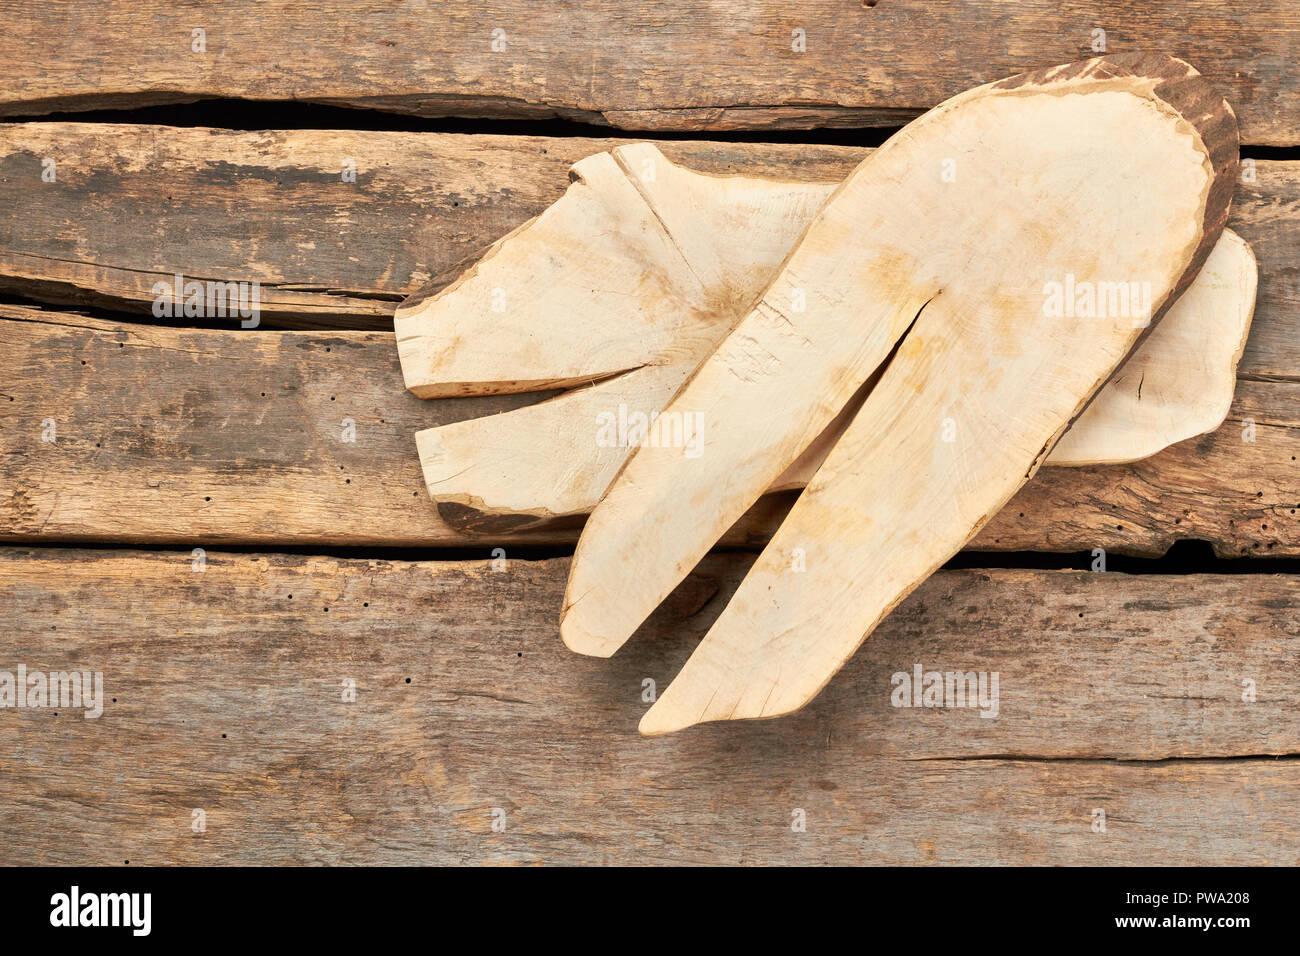 Slices of wood on rustic floor. Tree trunks on old wooden boards. Vintage kitchen tray. Stock Photo